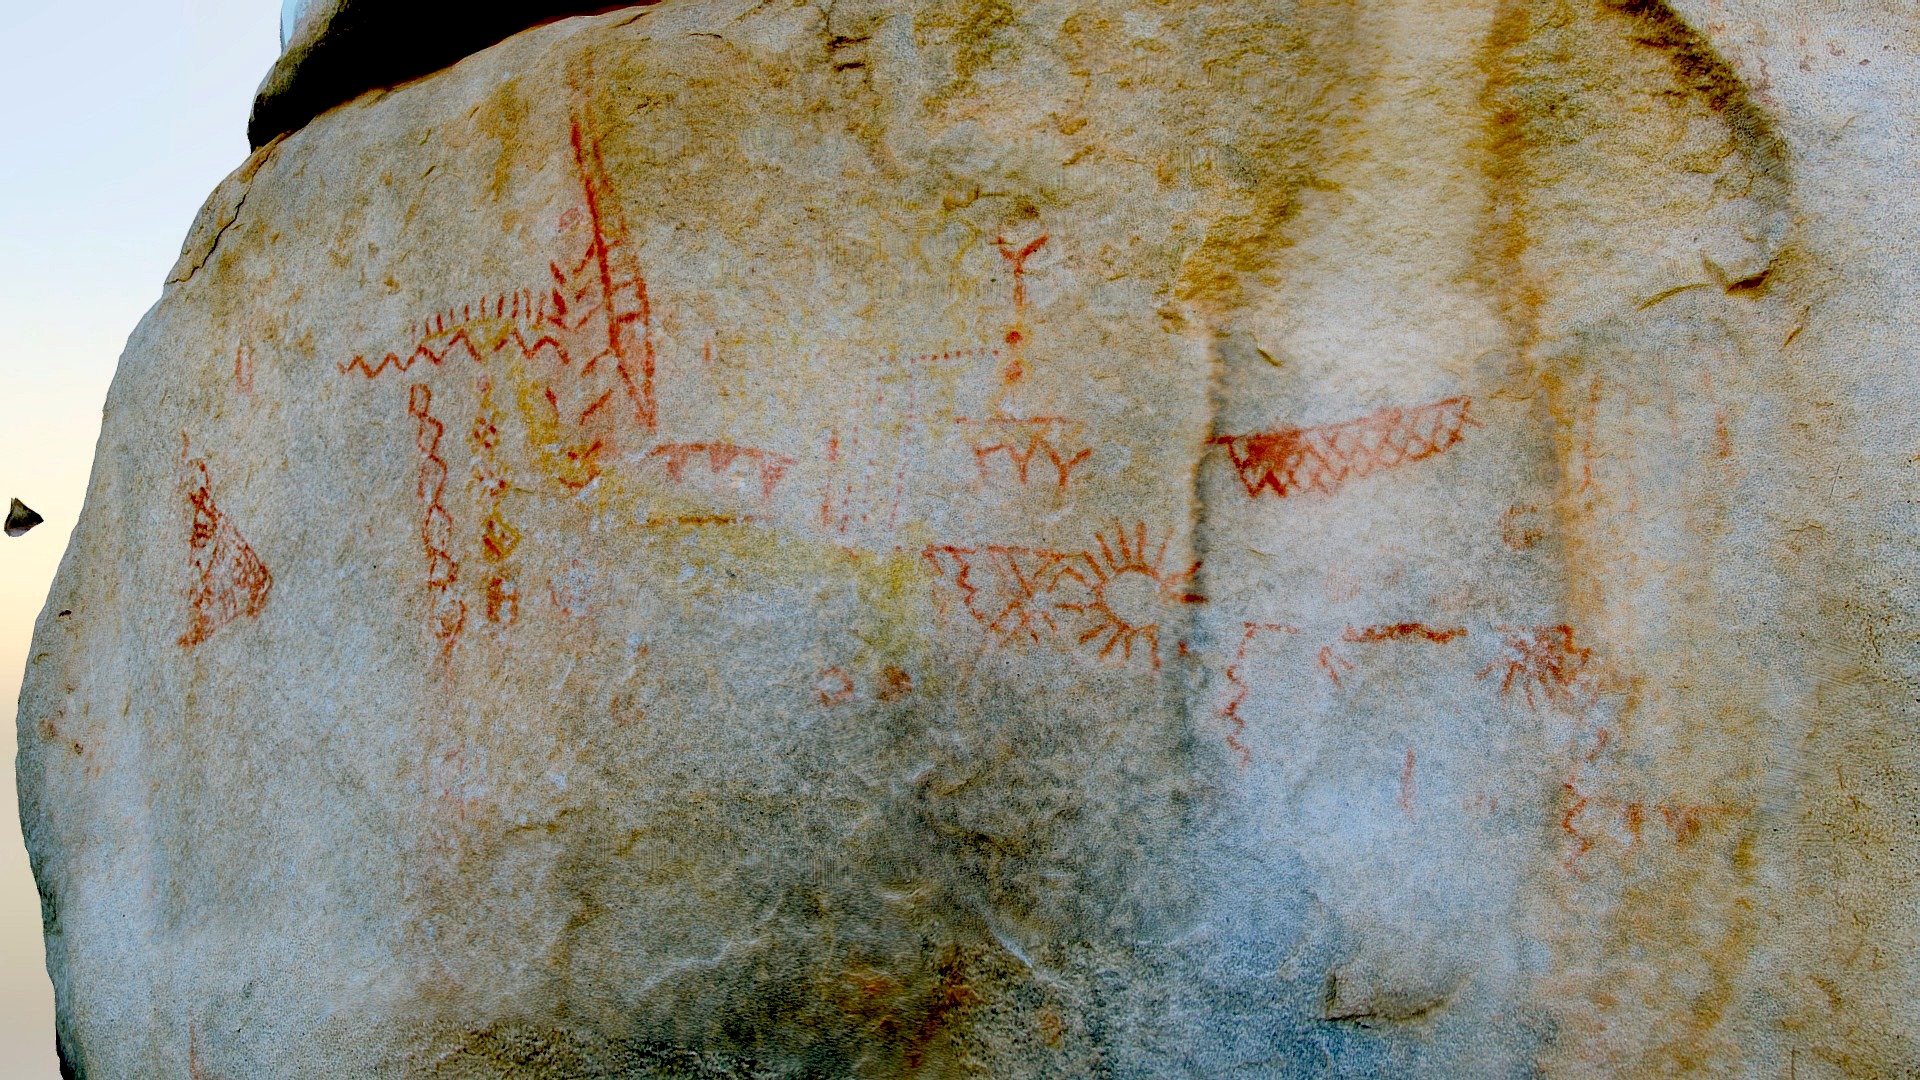 SoCal Pictograph